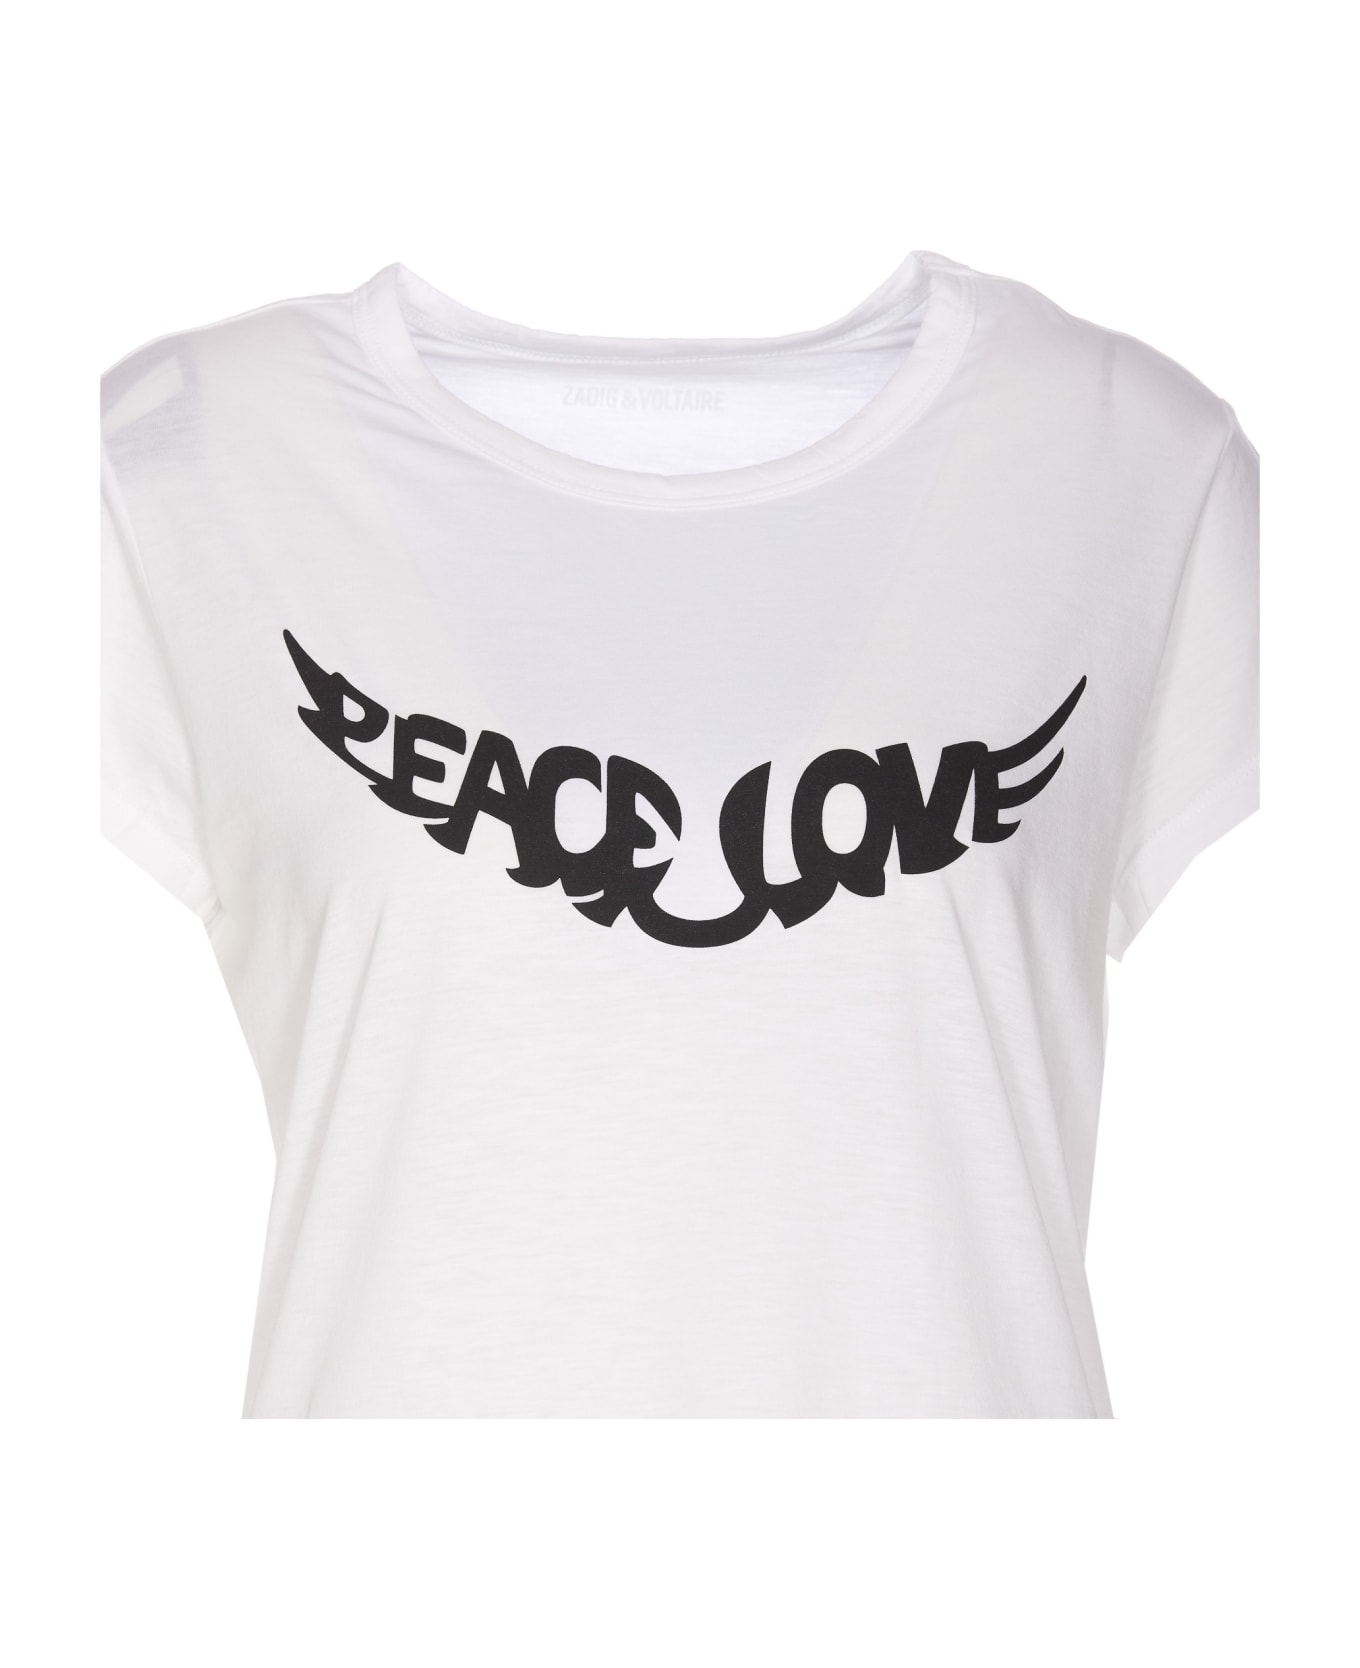 Zadig & Voltaire Woop Peace Love Wings T-shirt - White Tシャツ